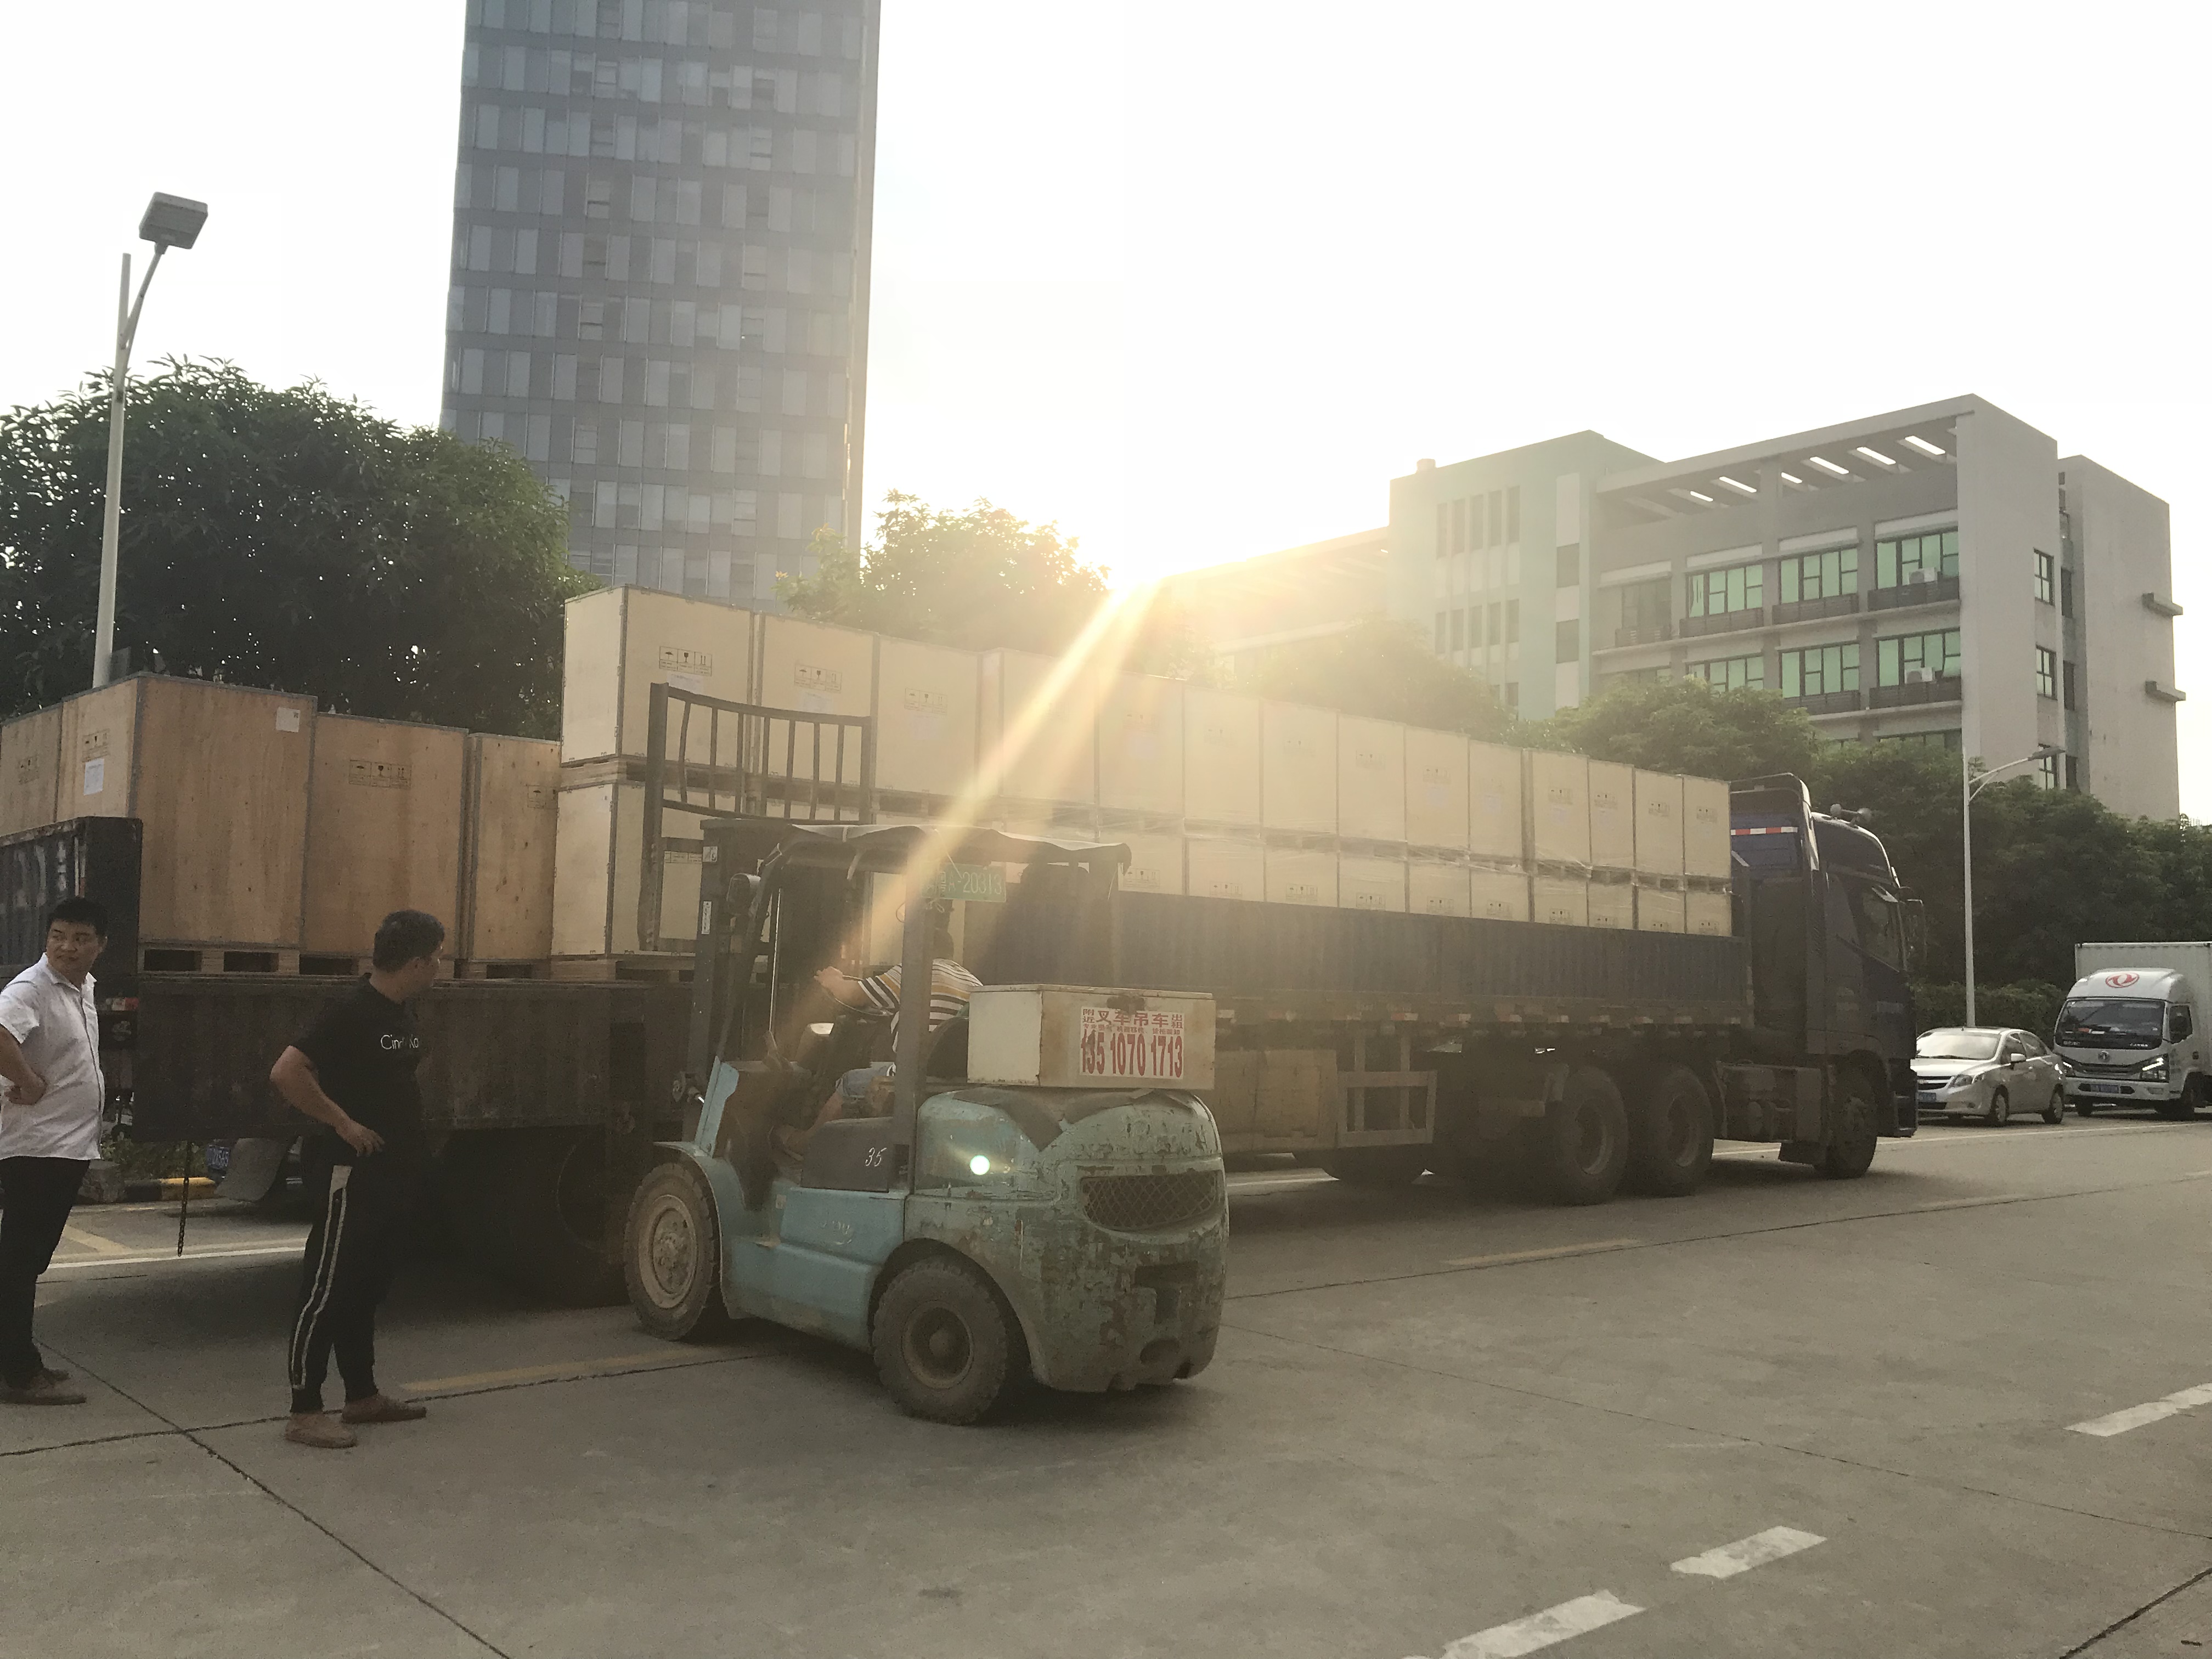 Guangzhou Efficient Technology Co., Ltd. delivered nearly 200 sets of high-power intelligent chargers to customers on time